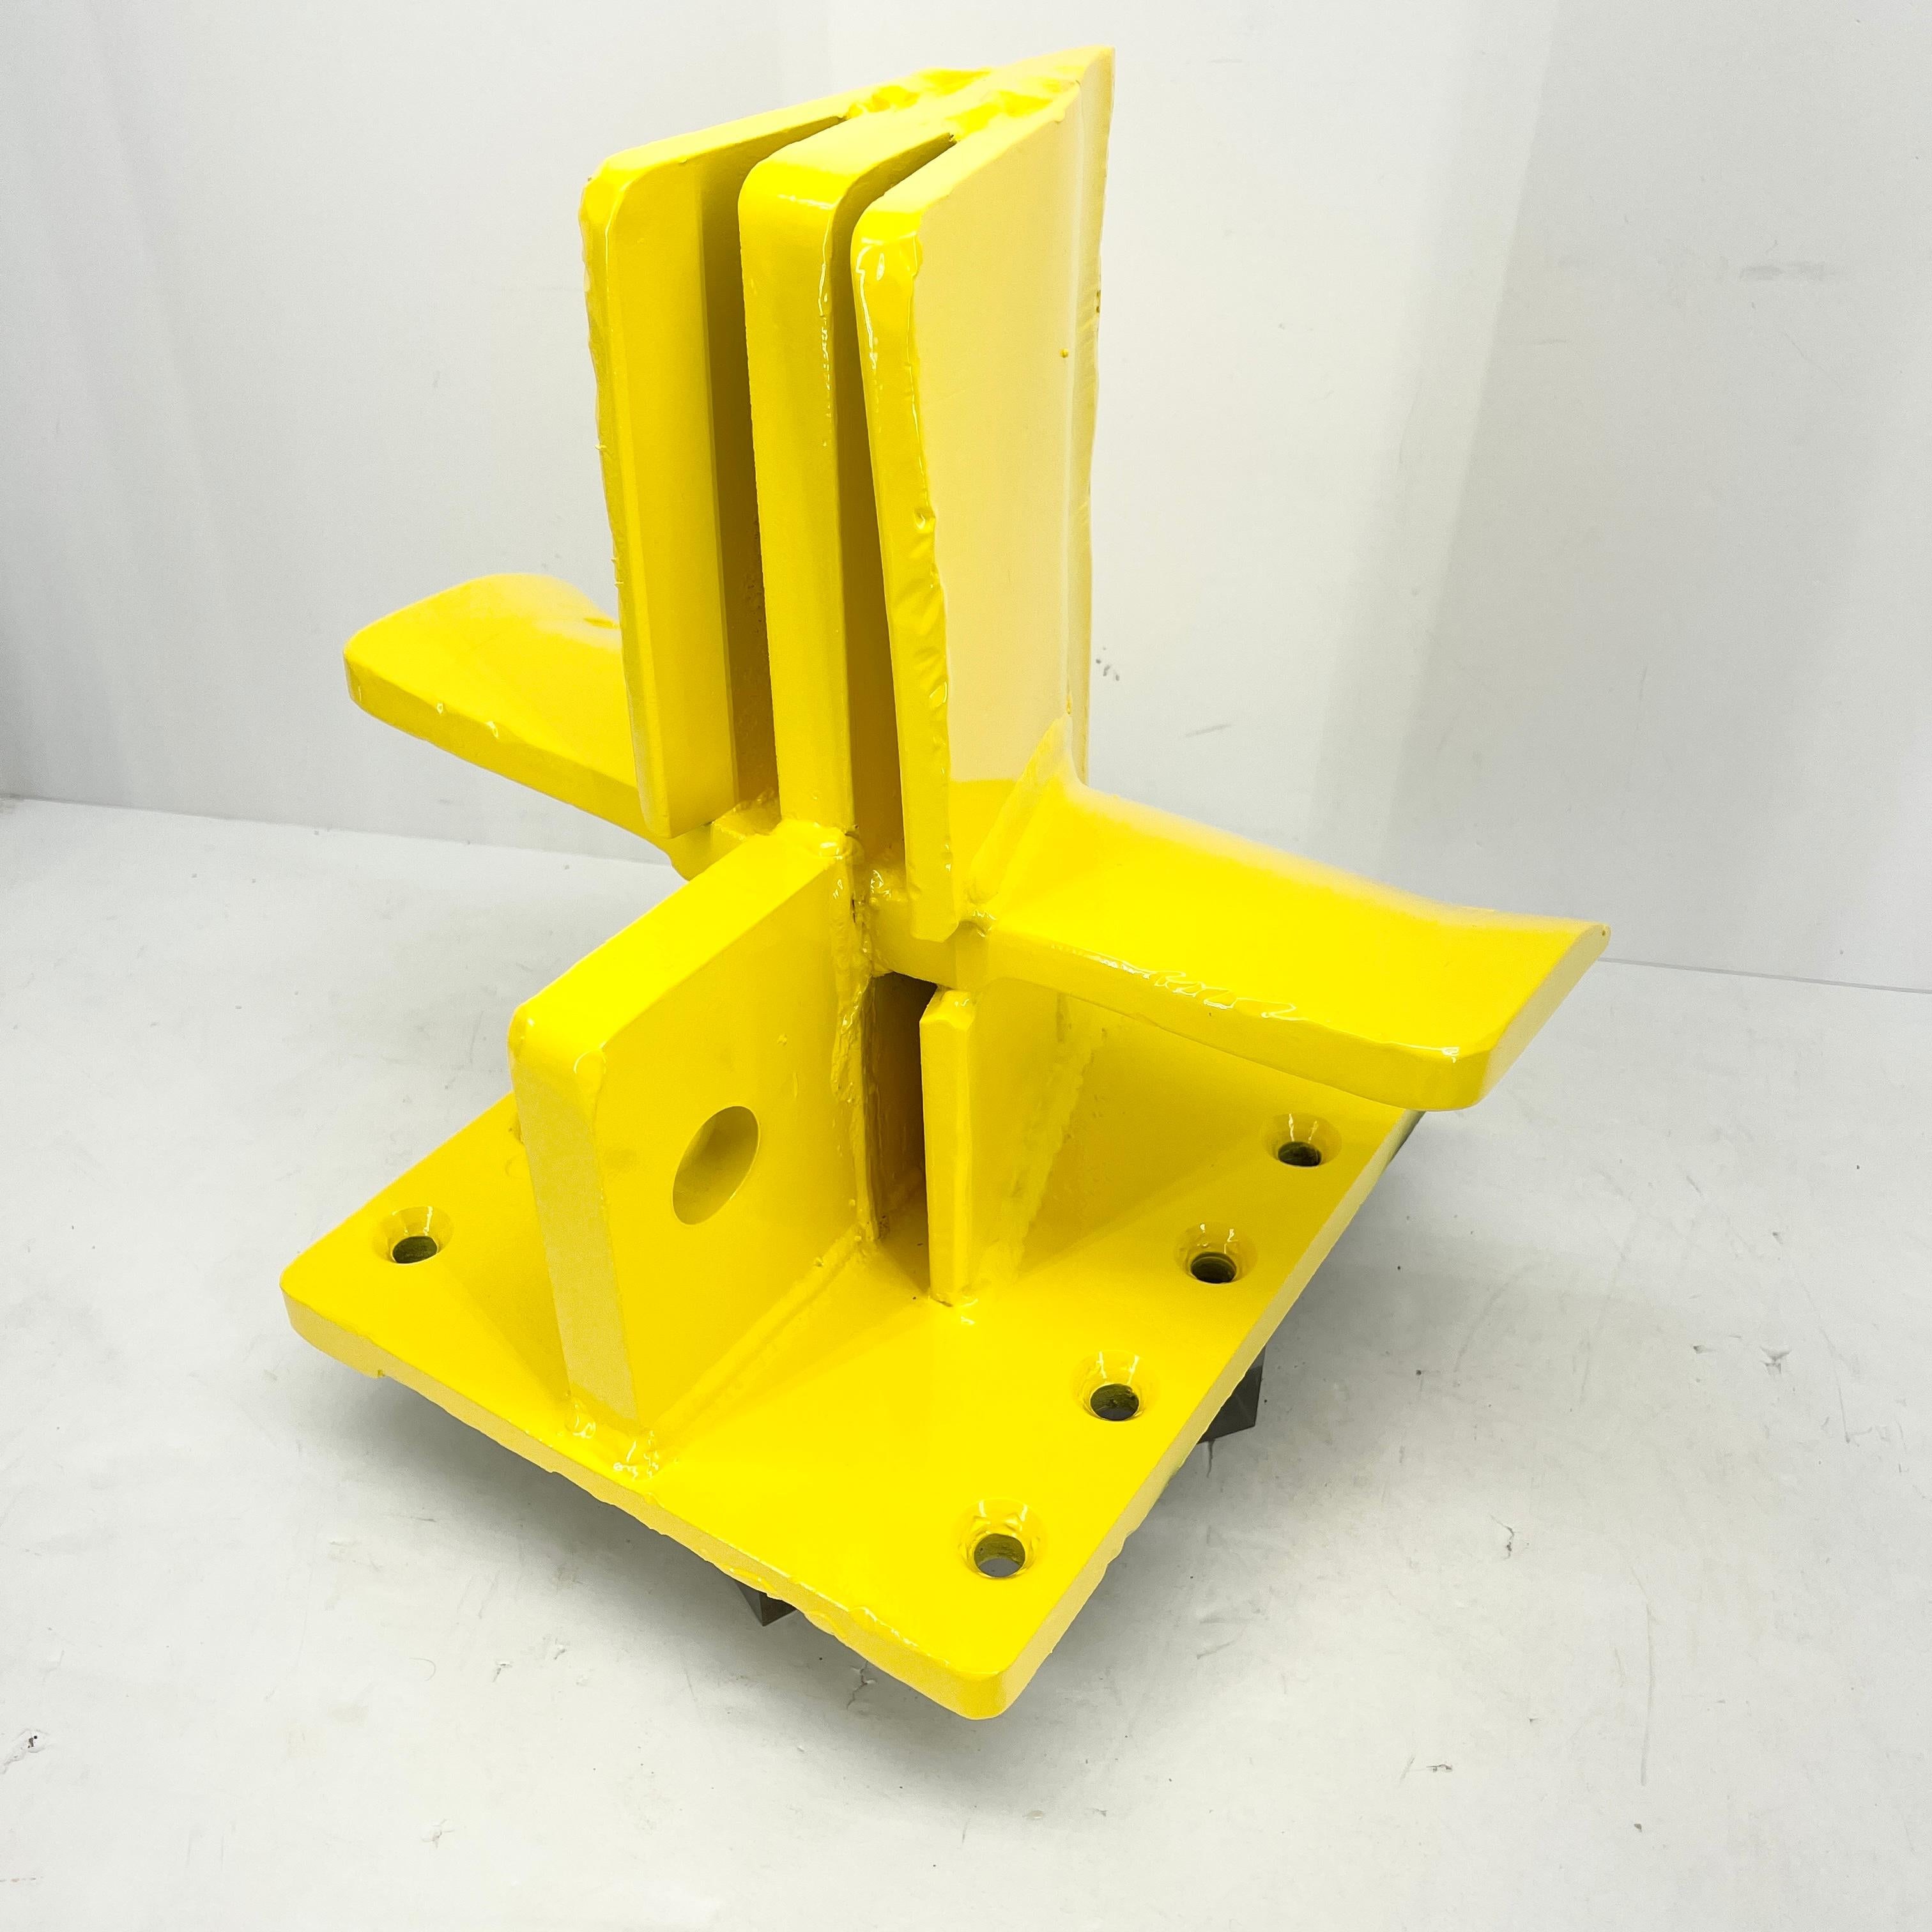 Bright Sunshine Yellow Abstract Eagle Head Sculpture From a 3 Way Wood Splitter For Sale 10